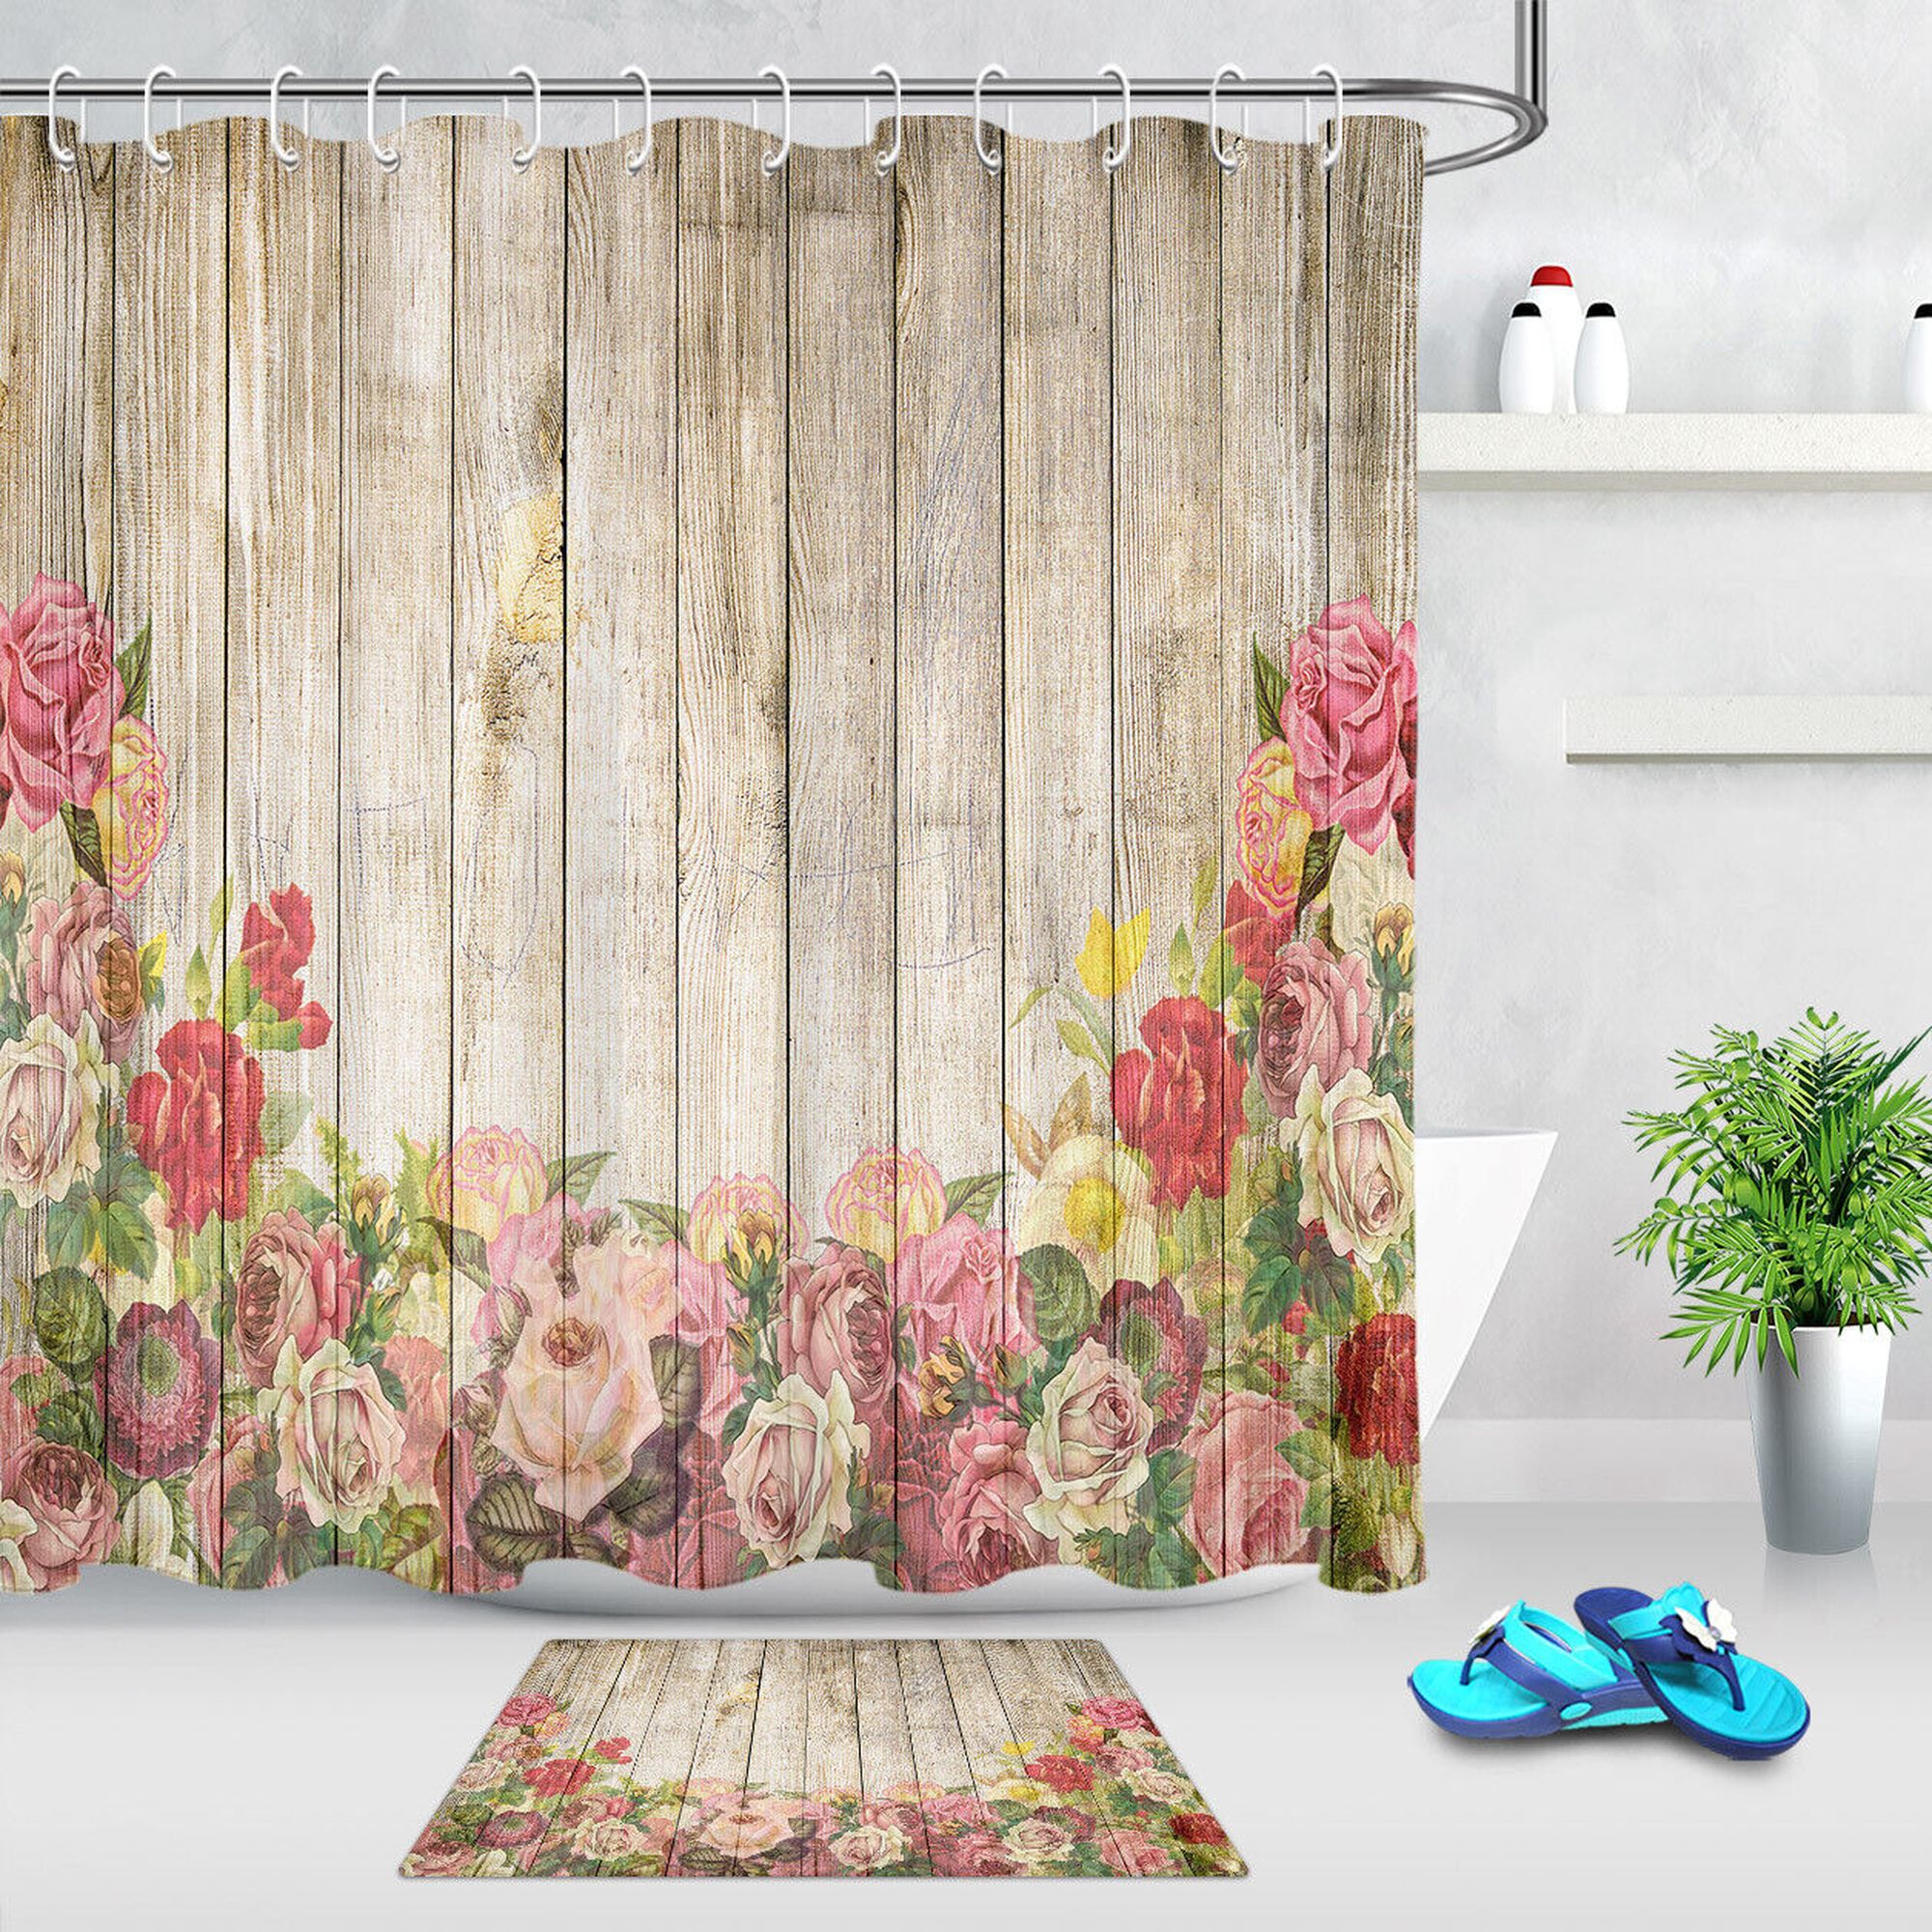 Rustic Floral Shower Curtain Set with Waterproof Fabric and Hooks for a ...